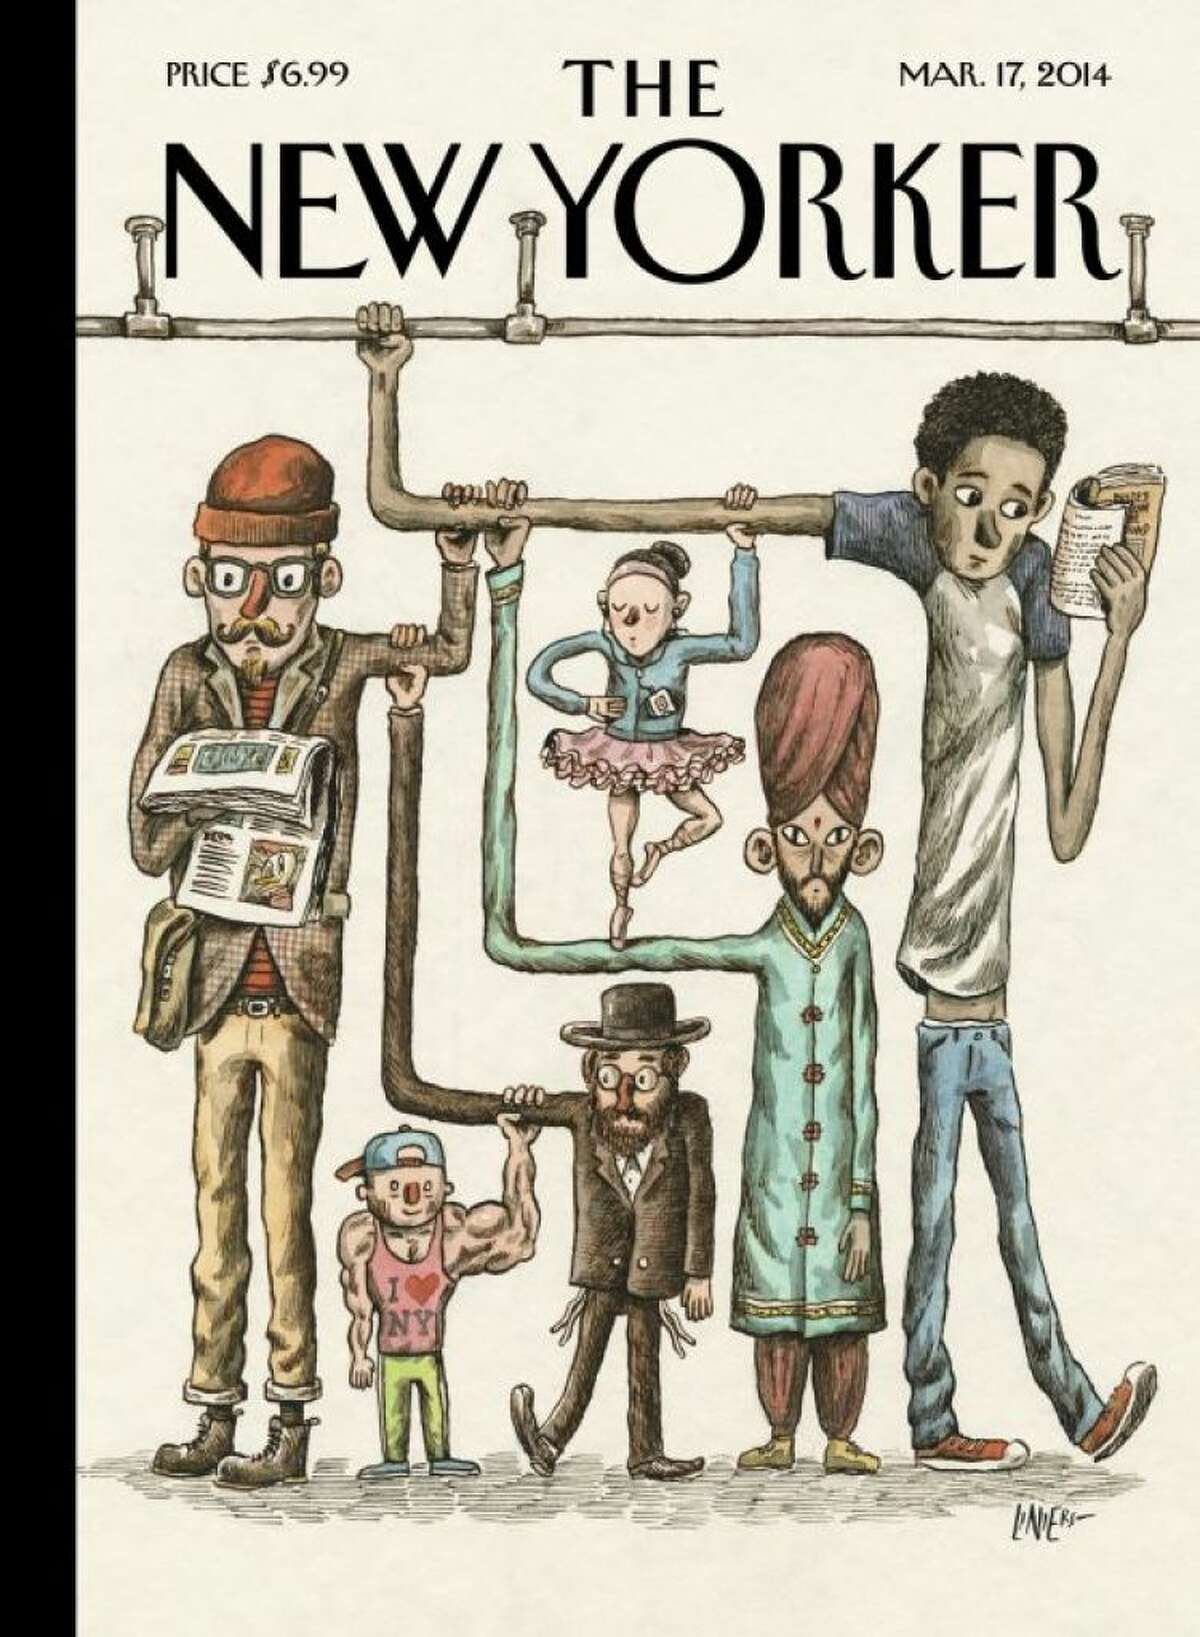 The March 17 cover of The New Yorker